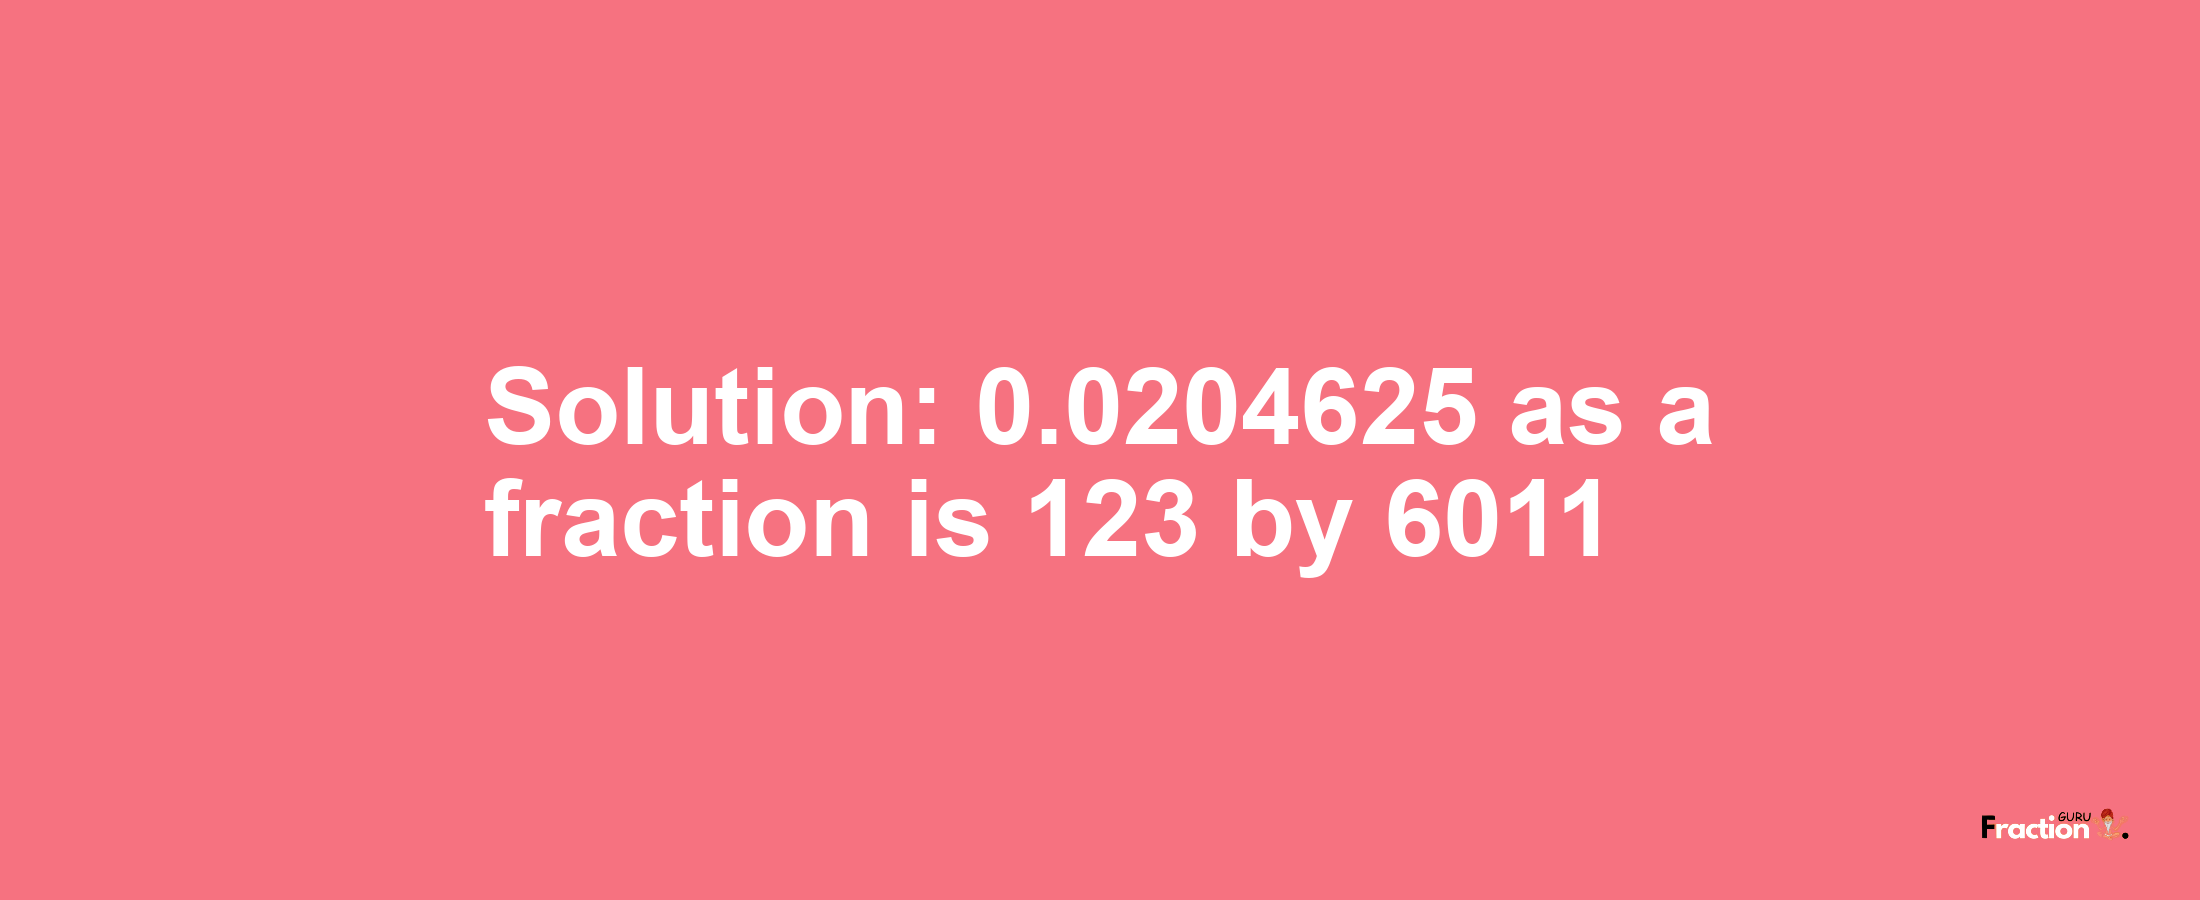 Solution:0.0204625 as a fraction is 123/6011